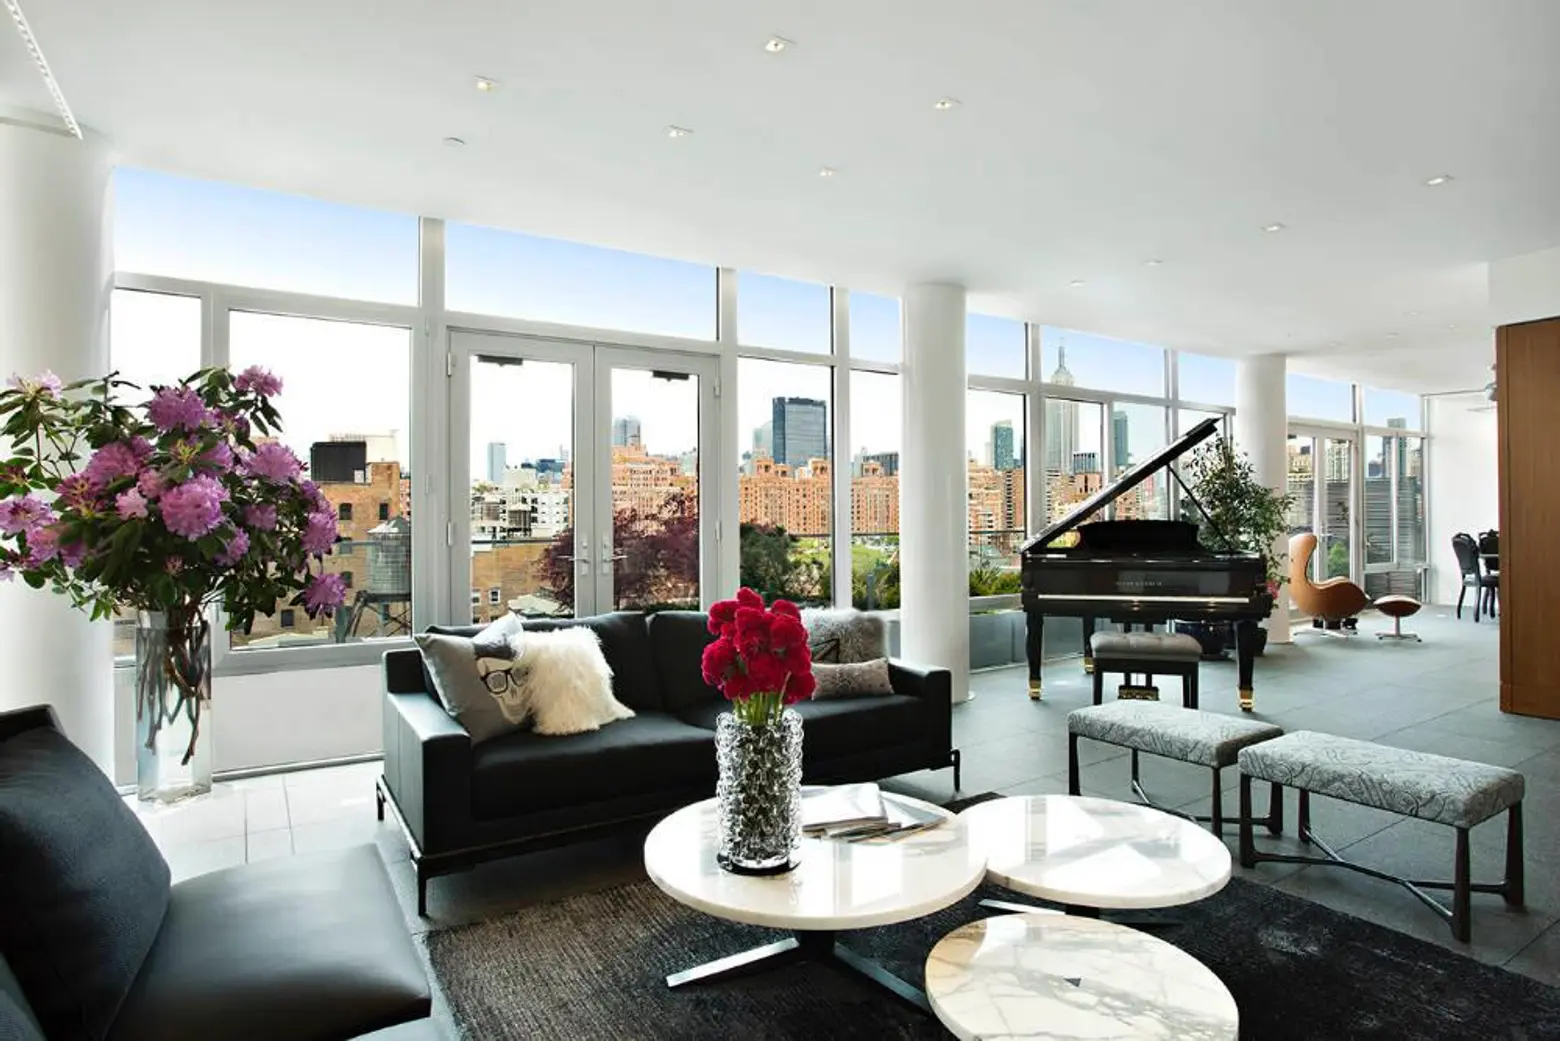 Beyonce Spotted Checking Out This $21.5 Million Chelsea Penthouse with Giant Apartment-Sized Closet